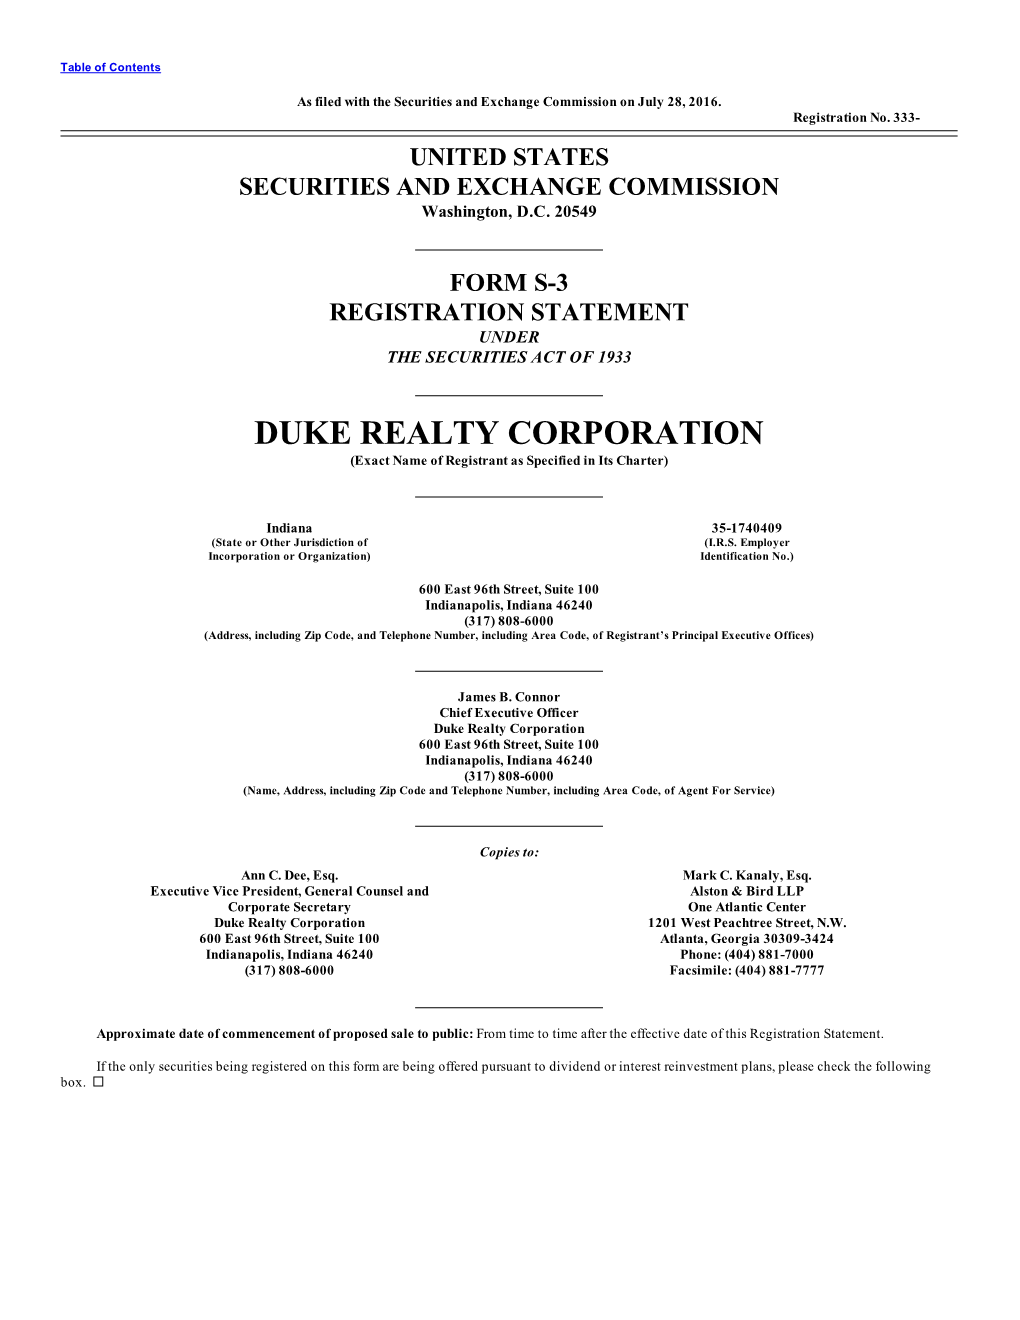 DUKE REALTY CORPORATION (Exact Name of Registrant As Specified in Its Charter)